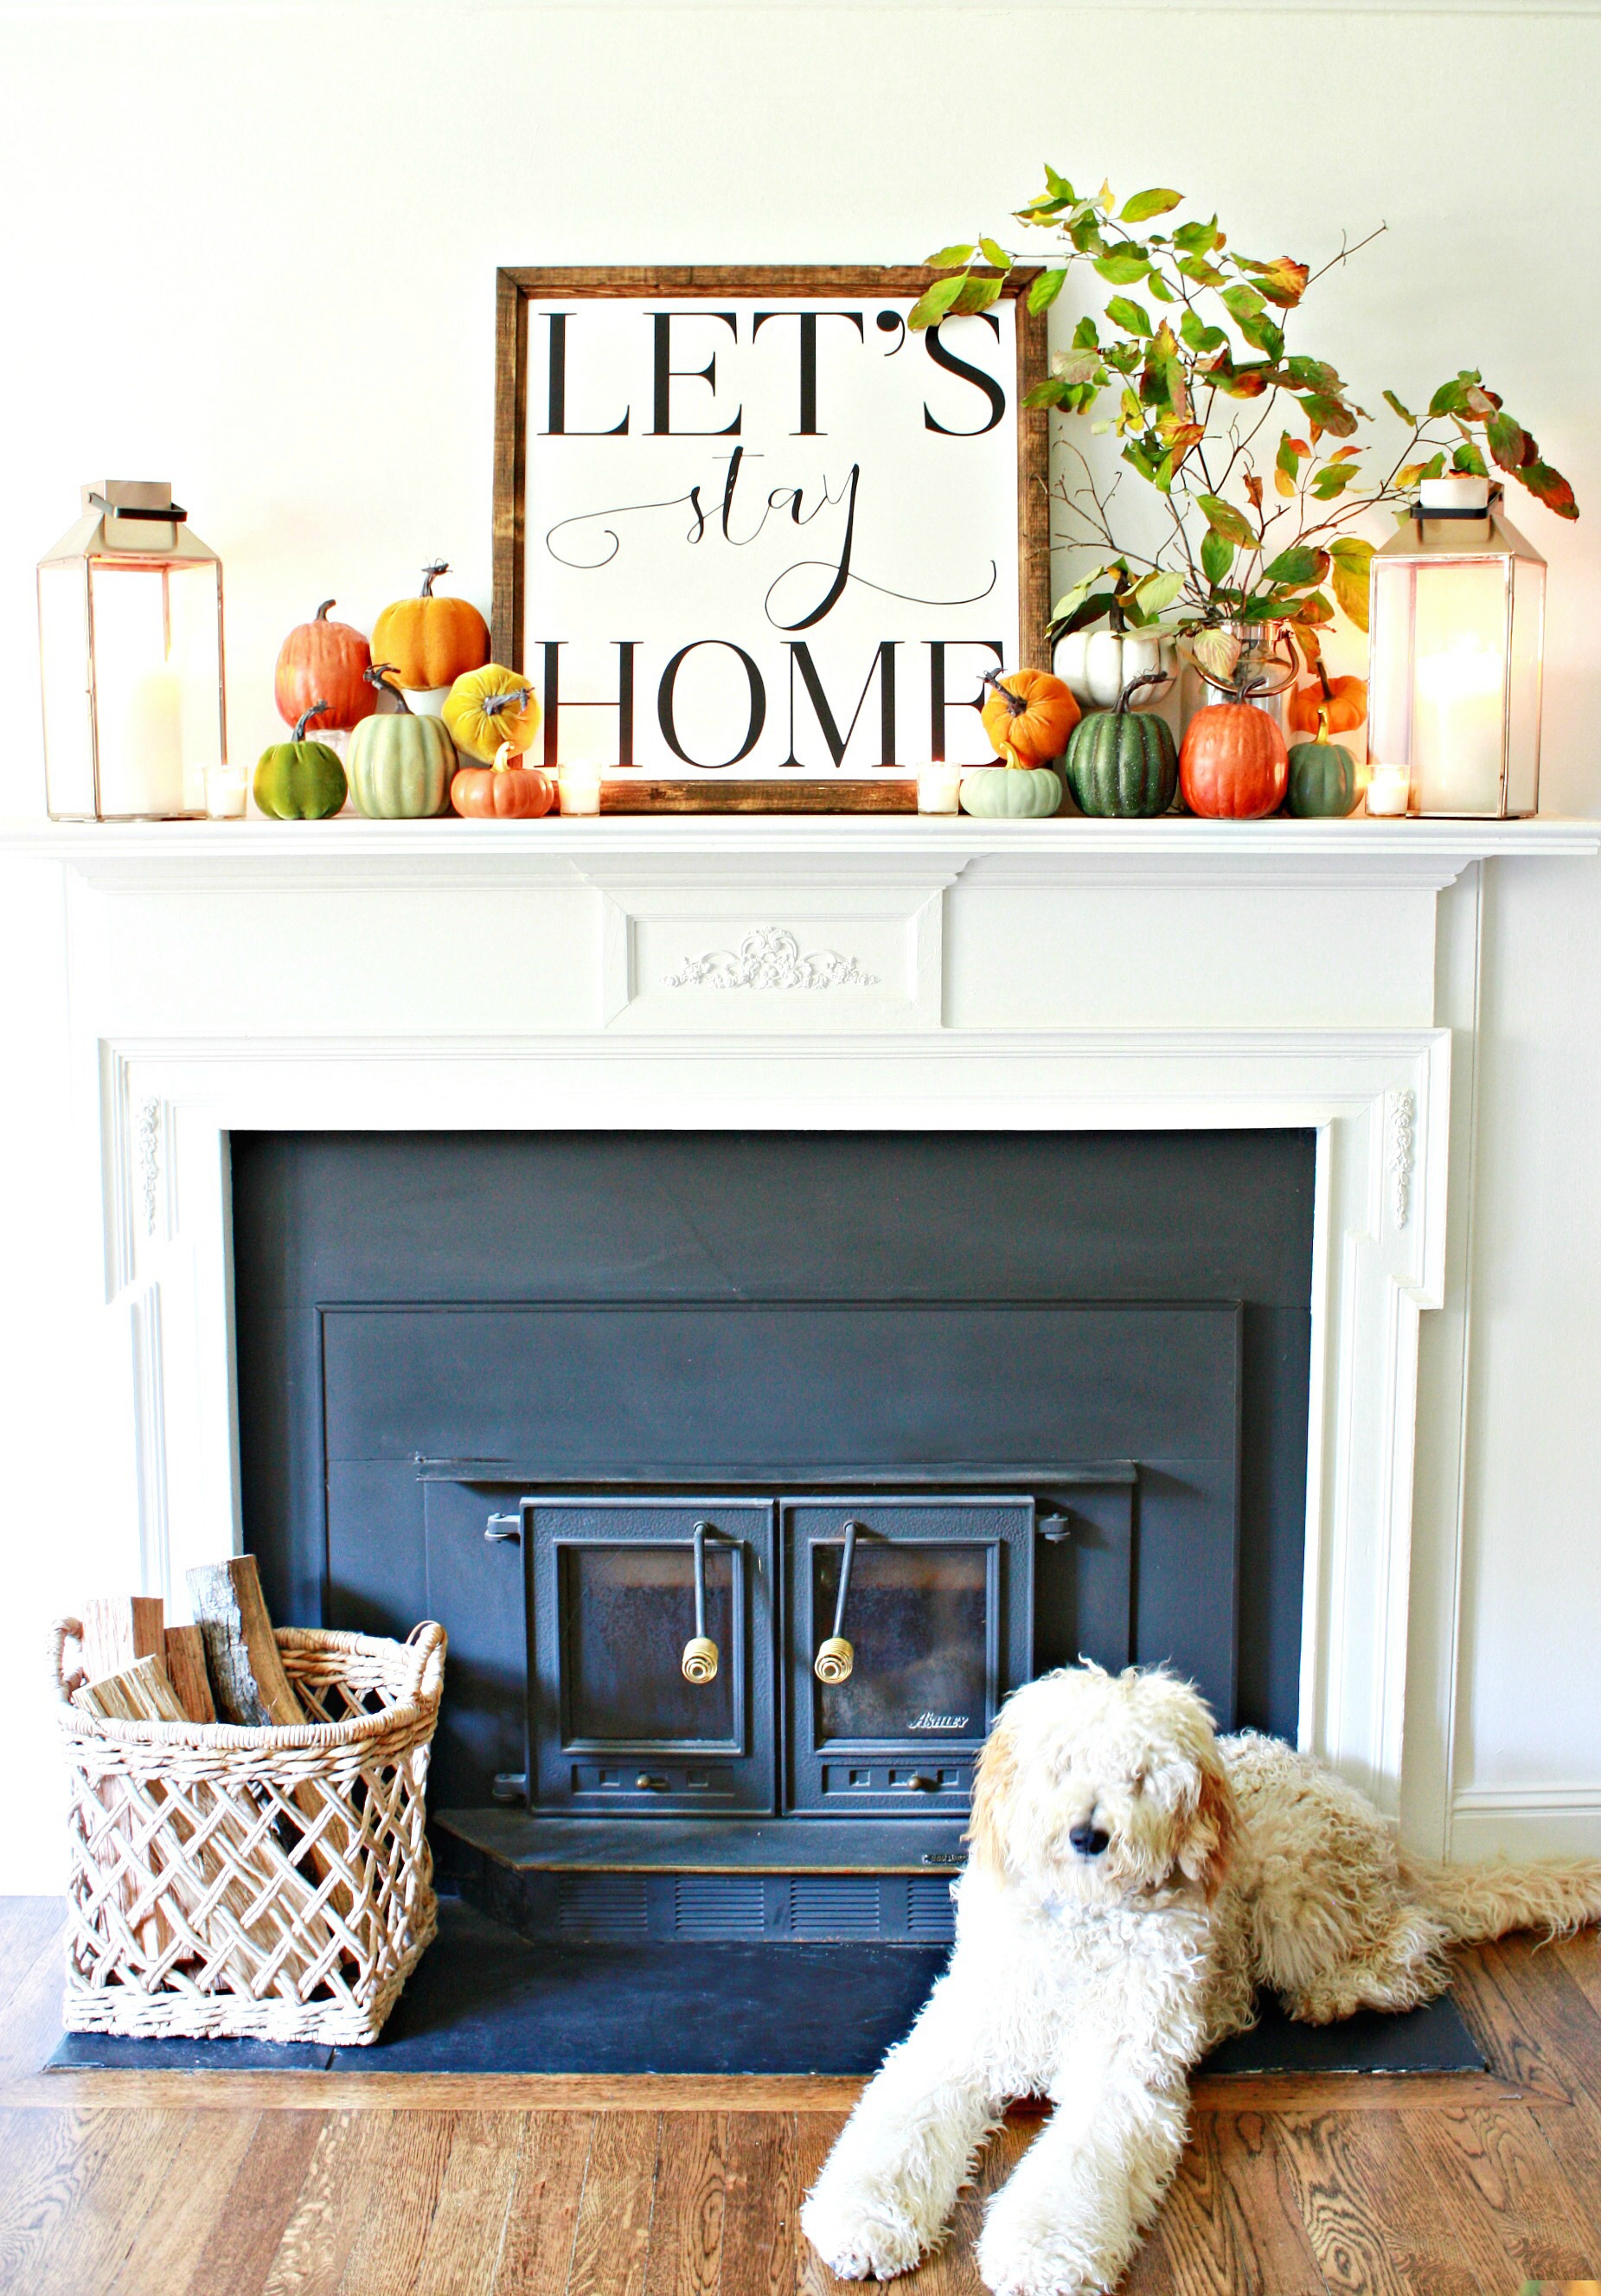 Let's Stay Home Fall Mantel